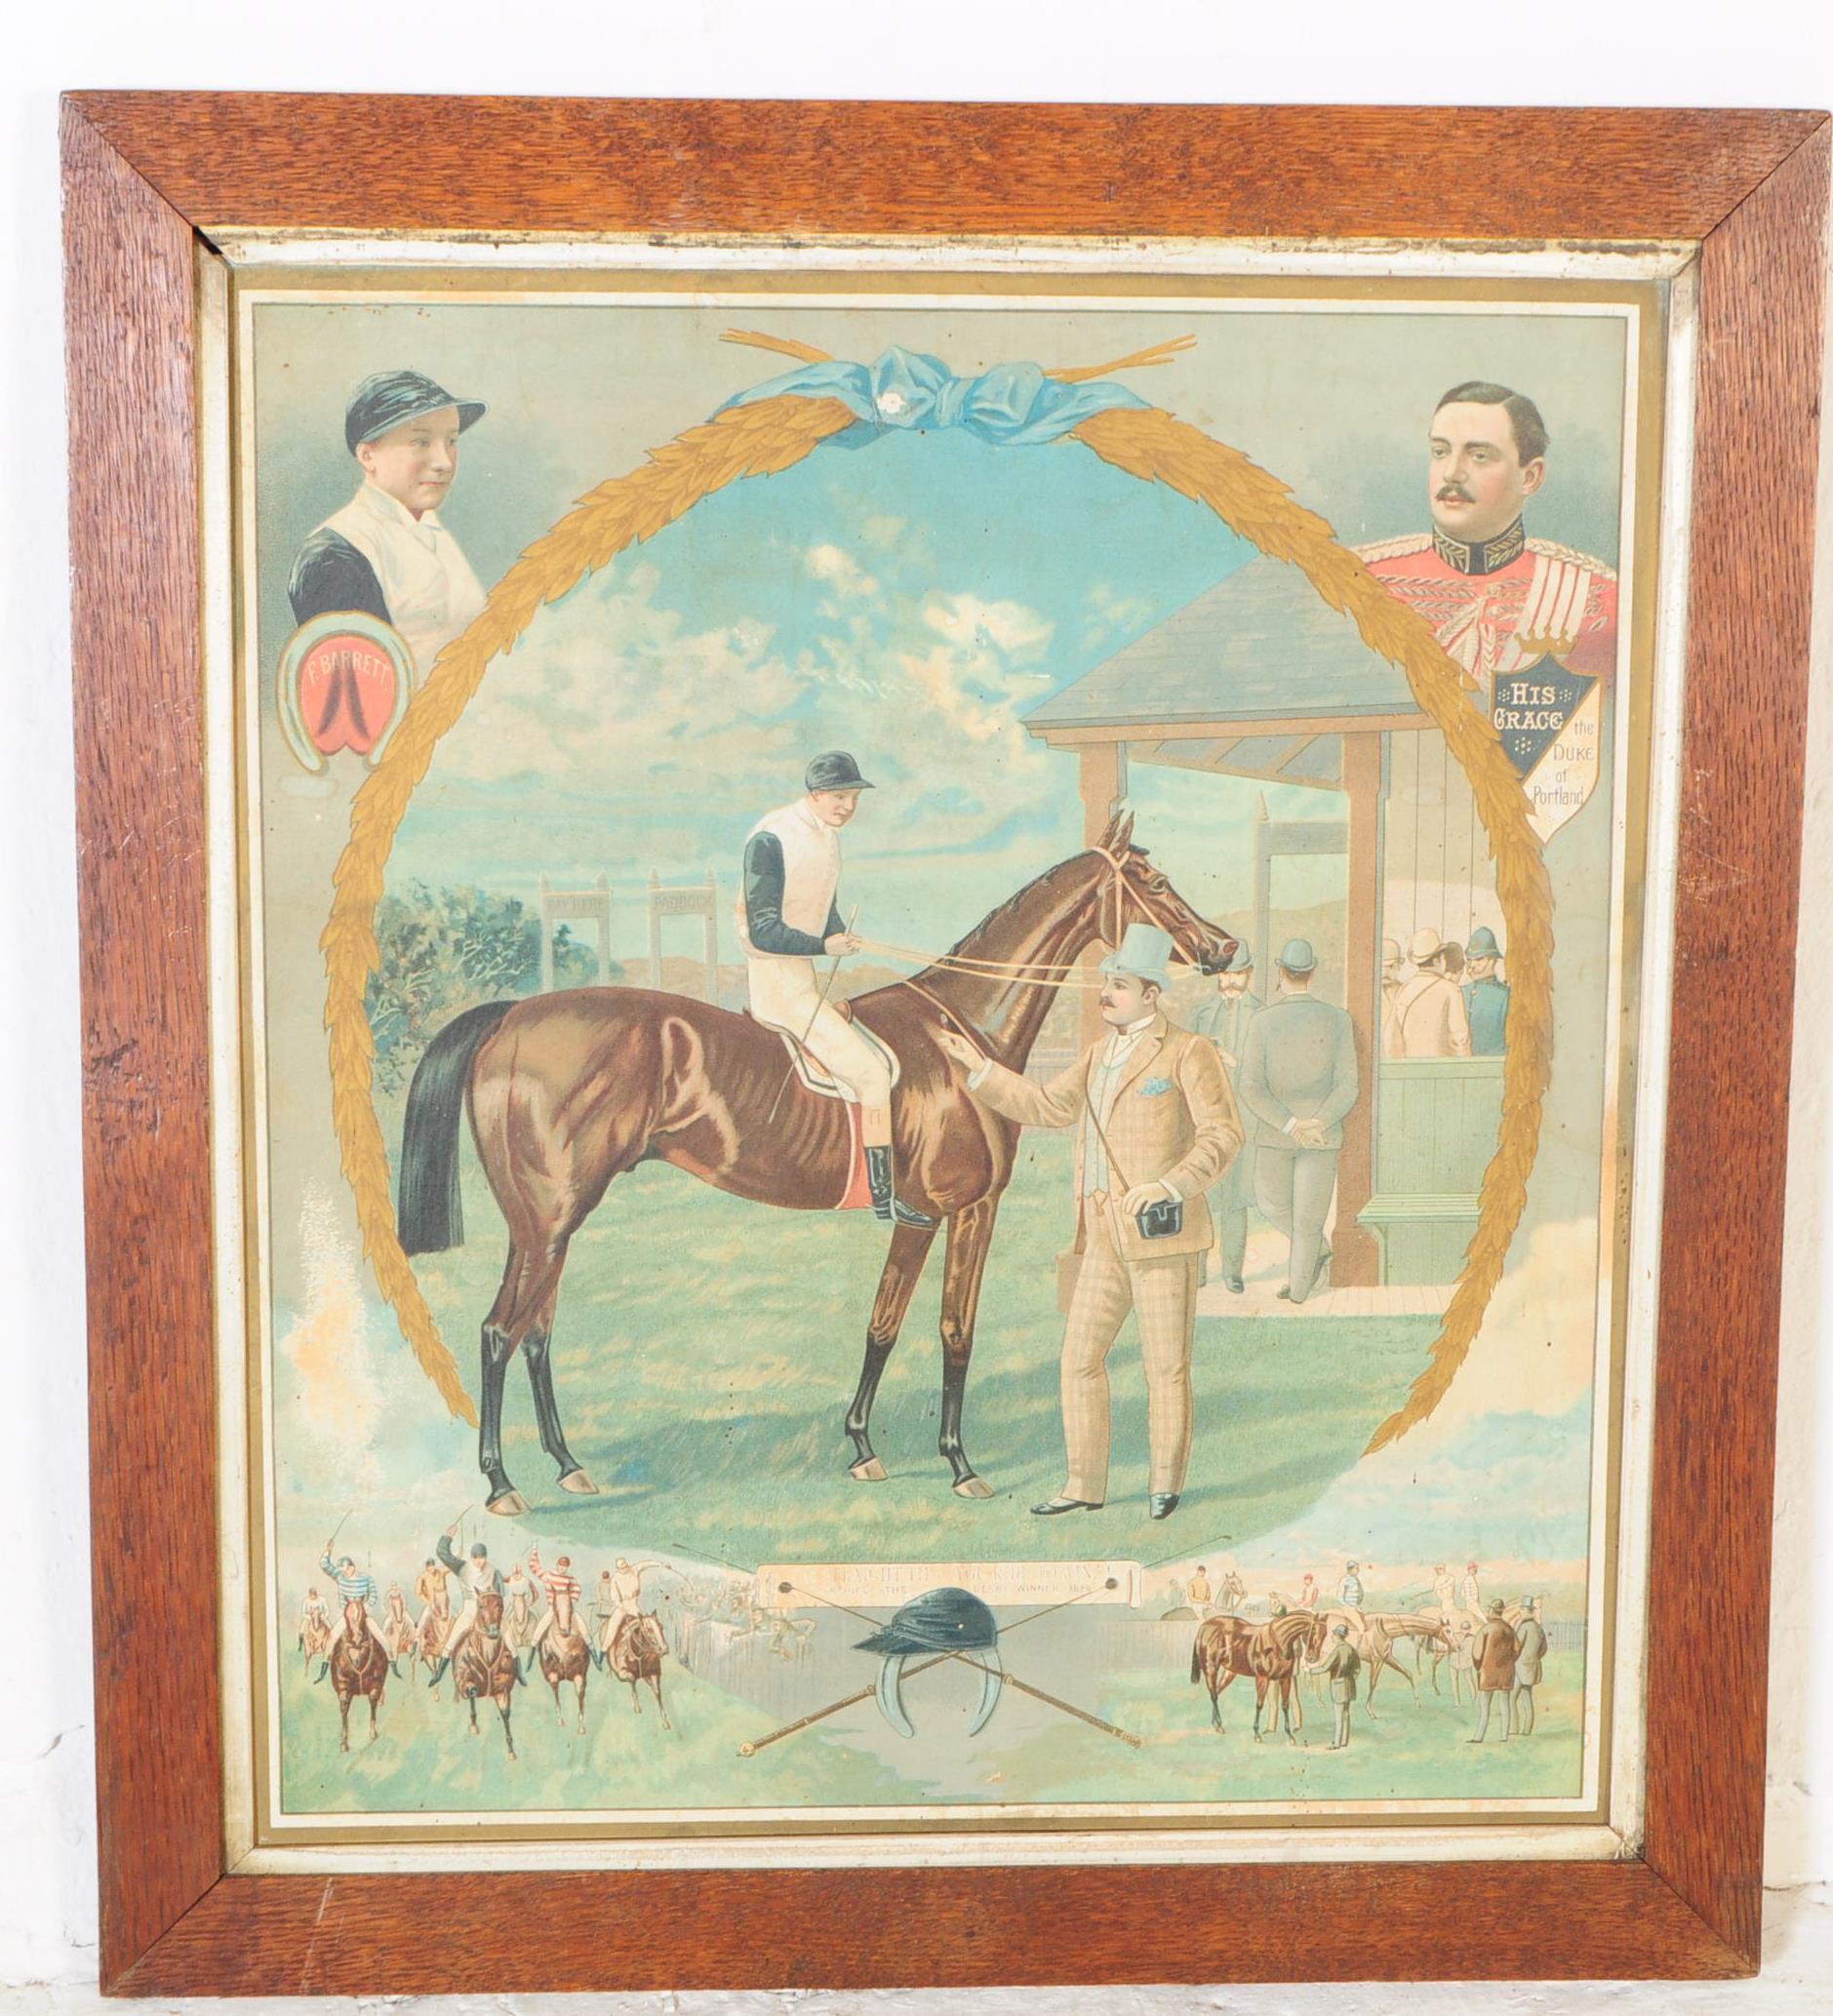 EQUESTRIAN INTEREST - COLLECTION OF HORSE RACING PRINTS - Image 6 of 8